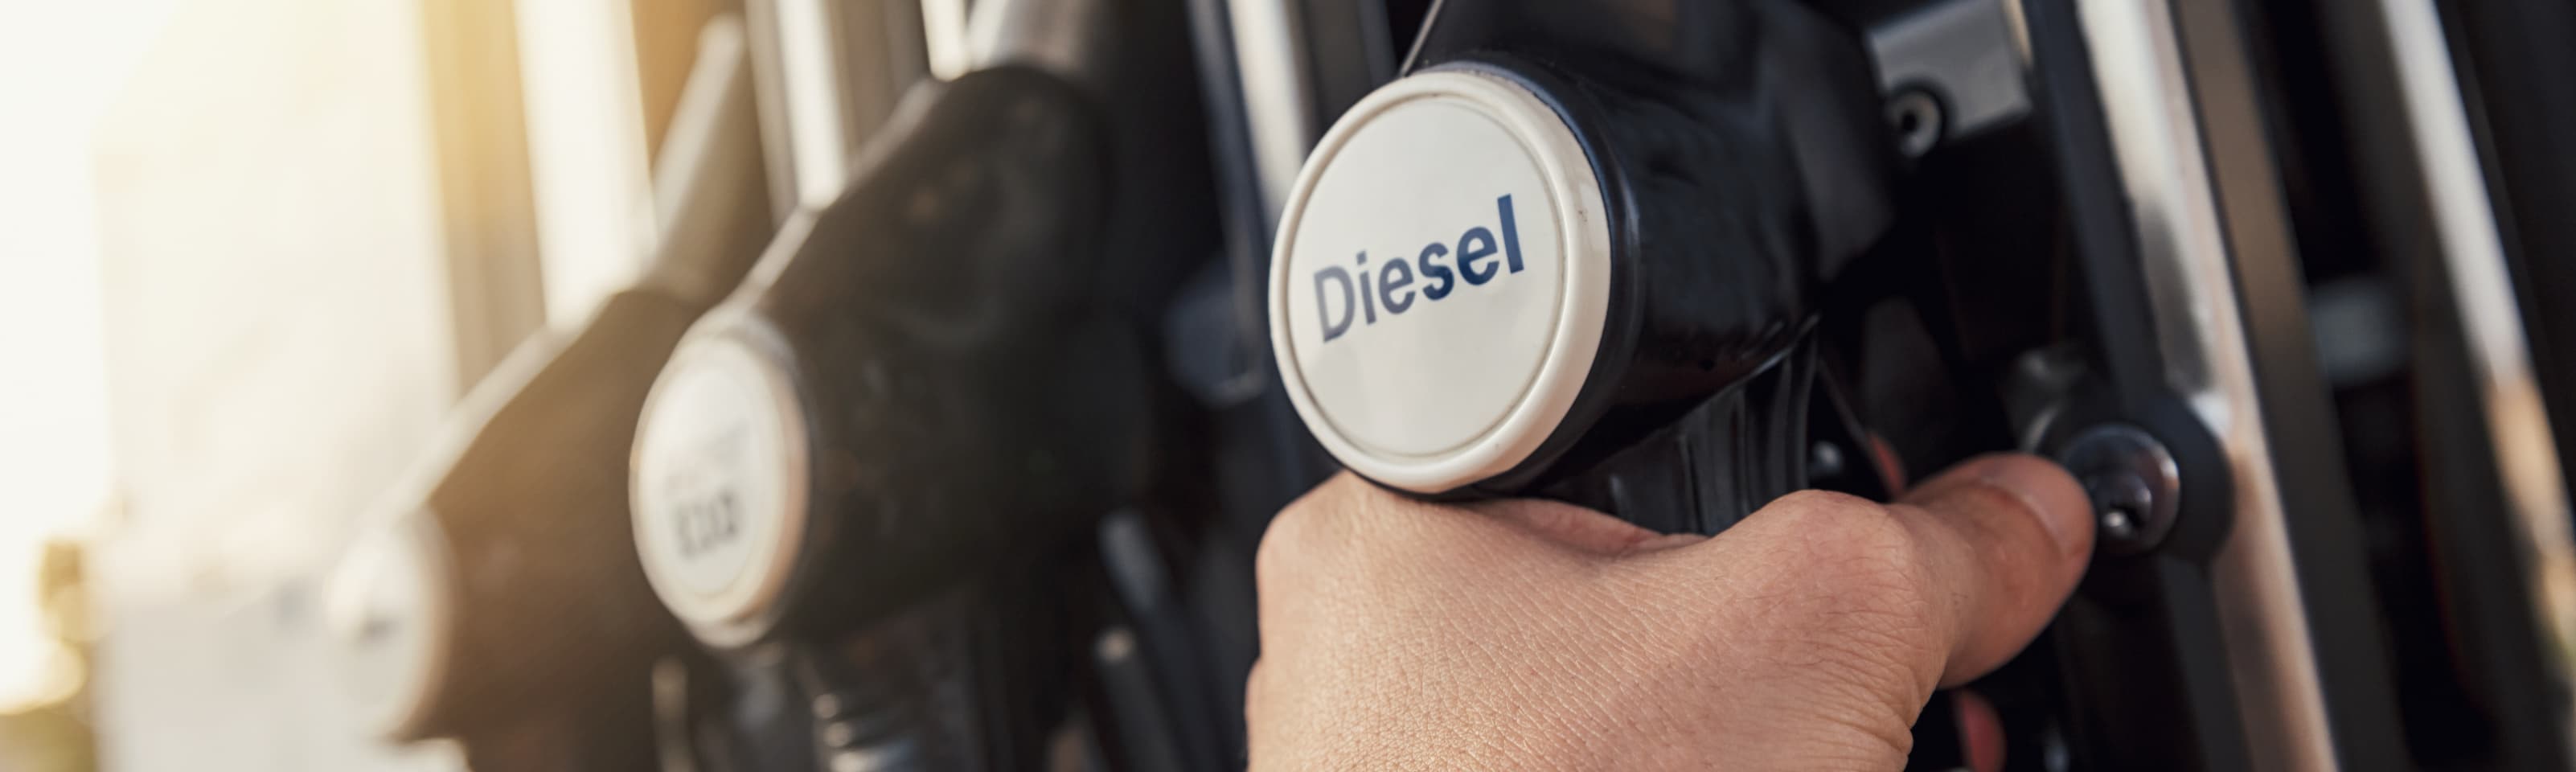 Are diesel prices finally returning to normal?